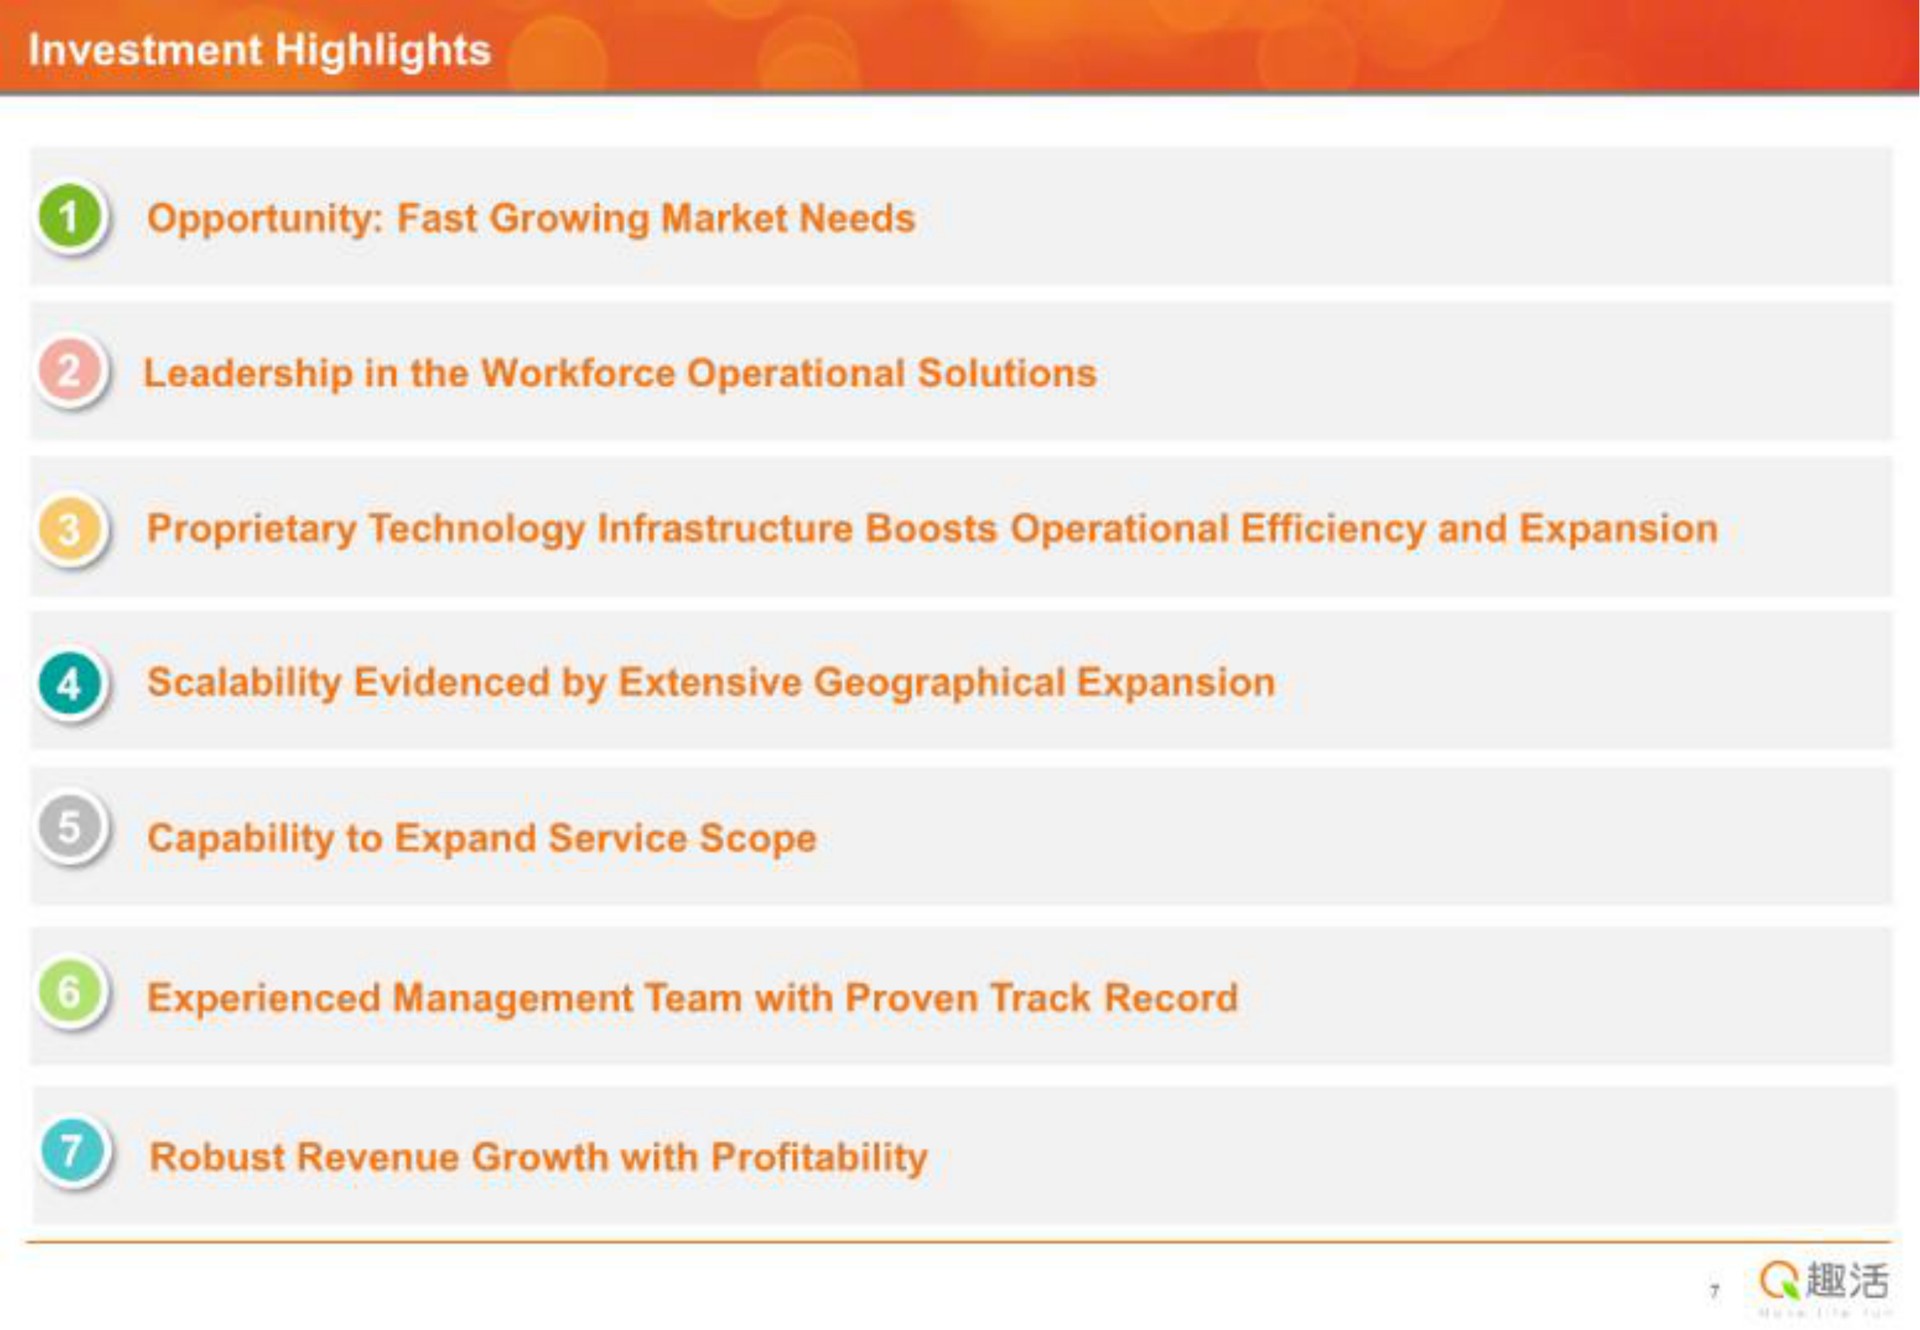 investment highlights opportunity fast growing market needs leadership in the operational solutions proprietary technology infrastructure boosts operational efficiency and expansion evidenced by extensive geographical expansion capability to expand service scope experienced management team with proven track record robust revenue growth with profitability | Quhuo